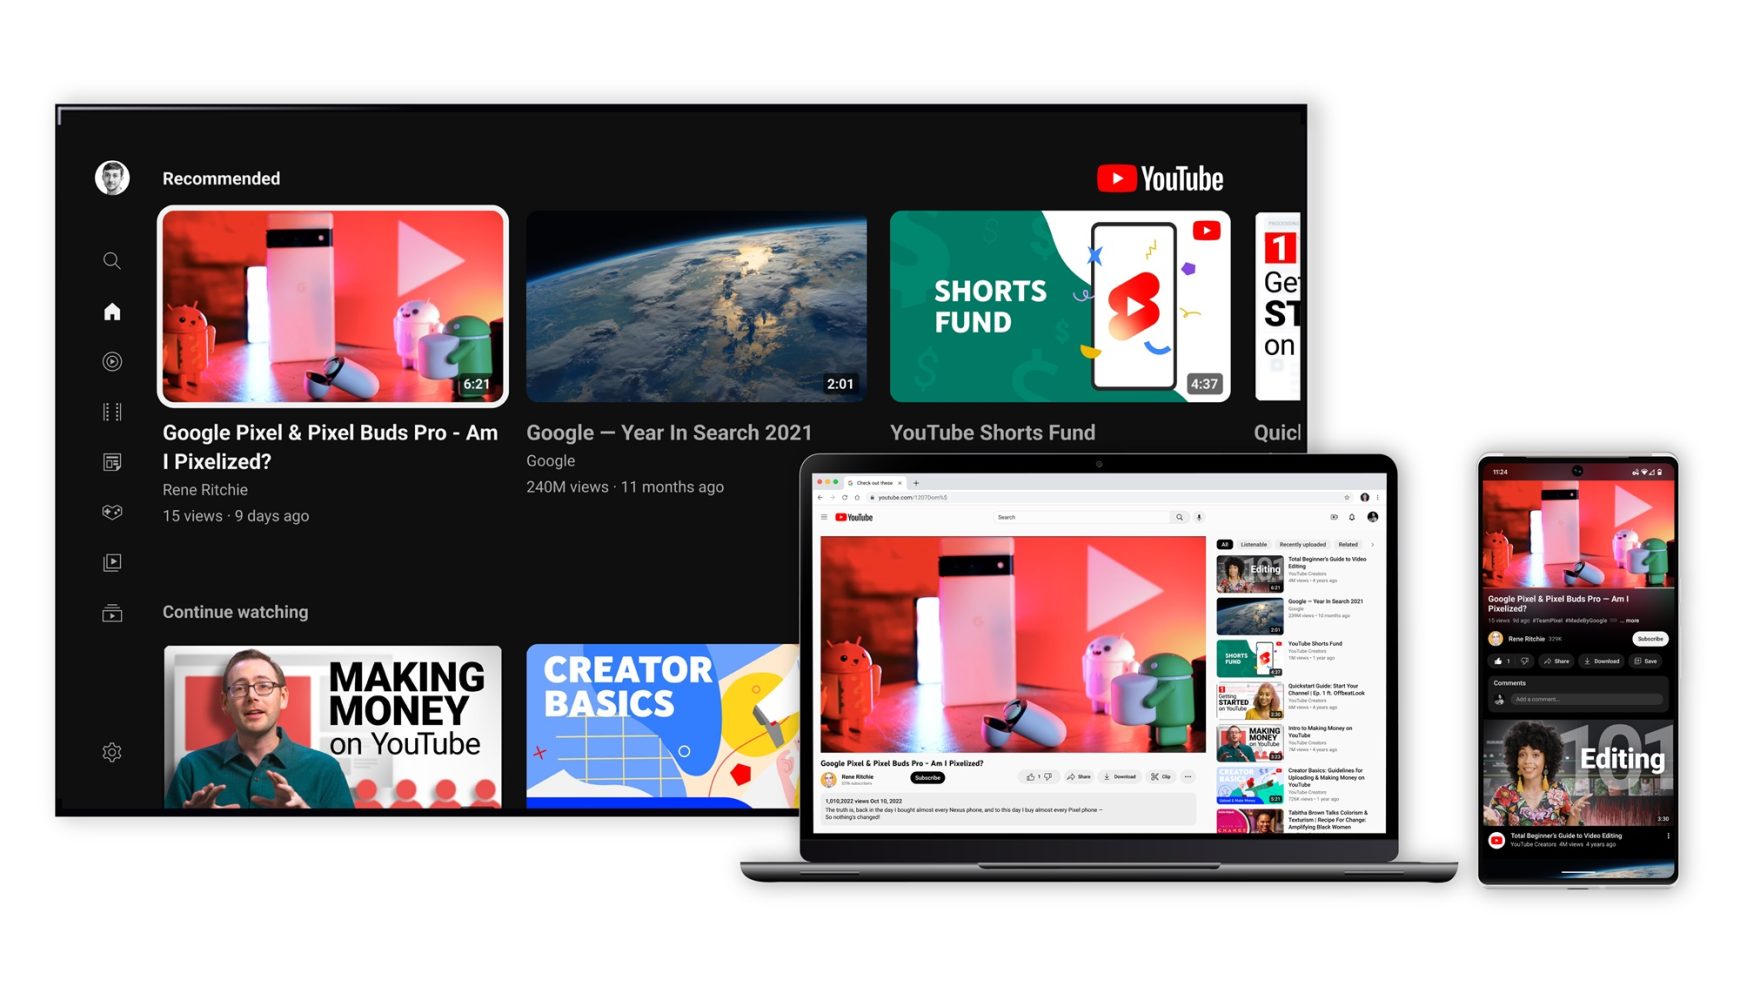 YouTube’s new AI tool helps creators come up with video ideas